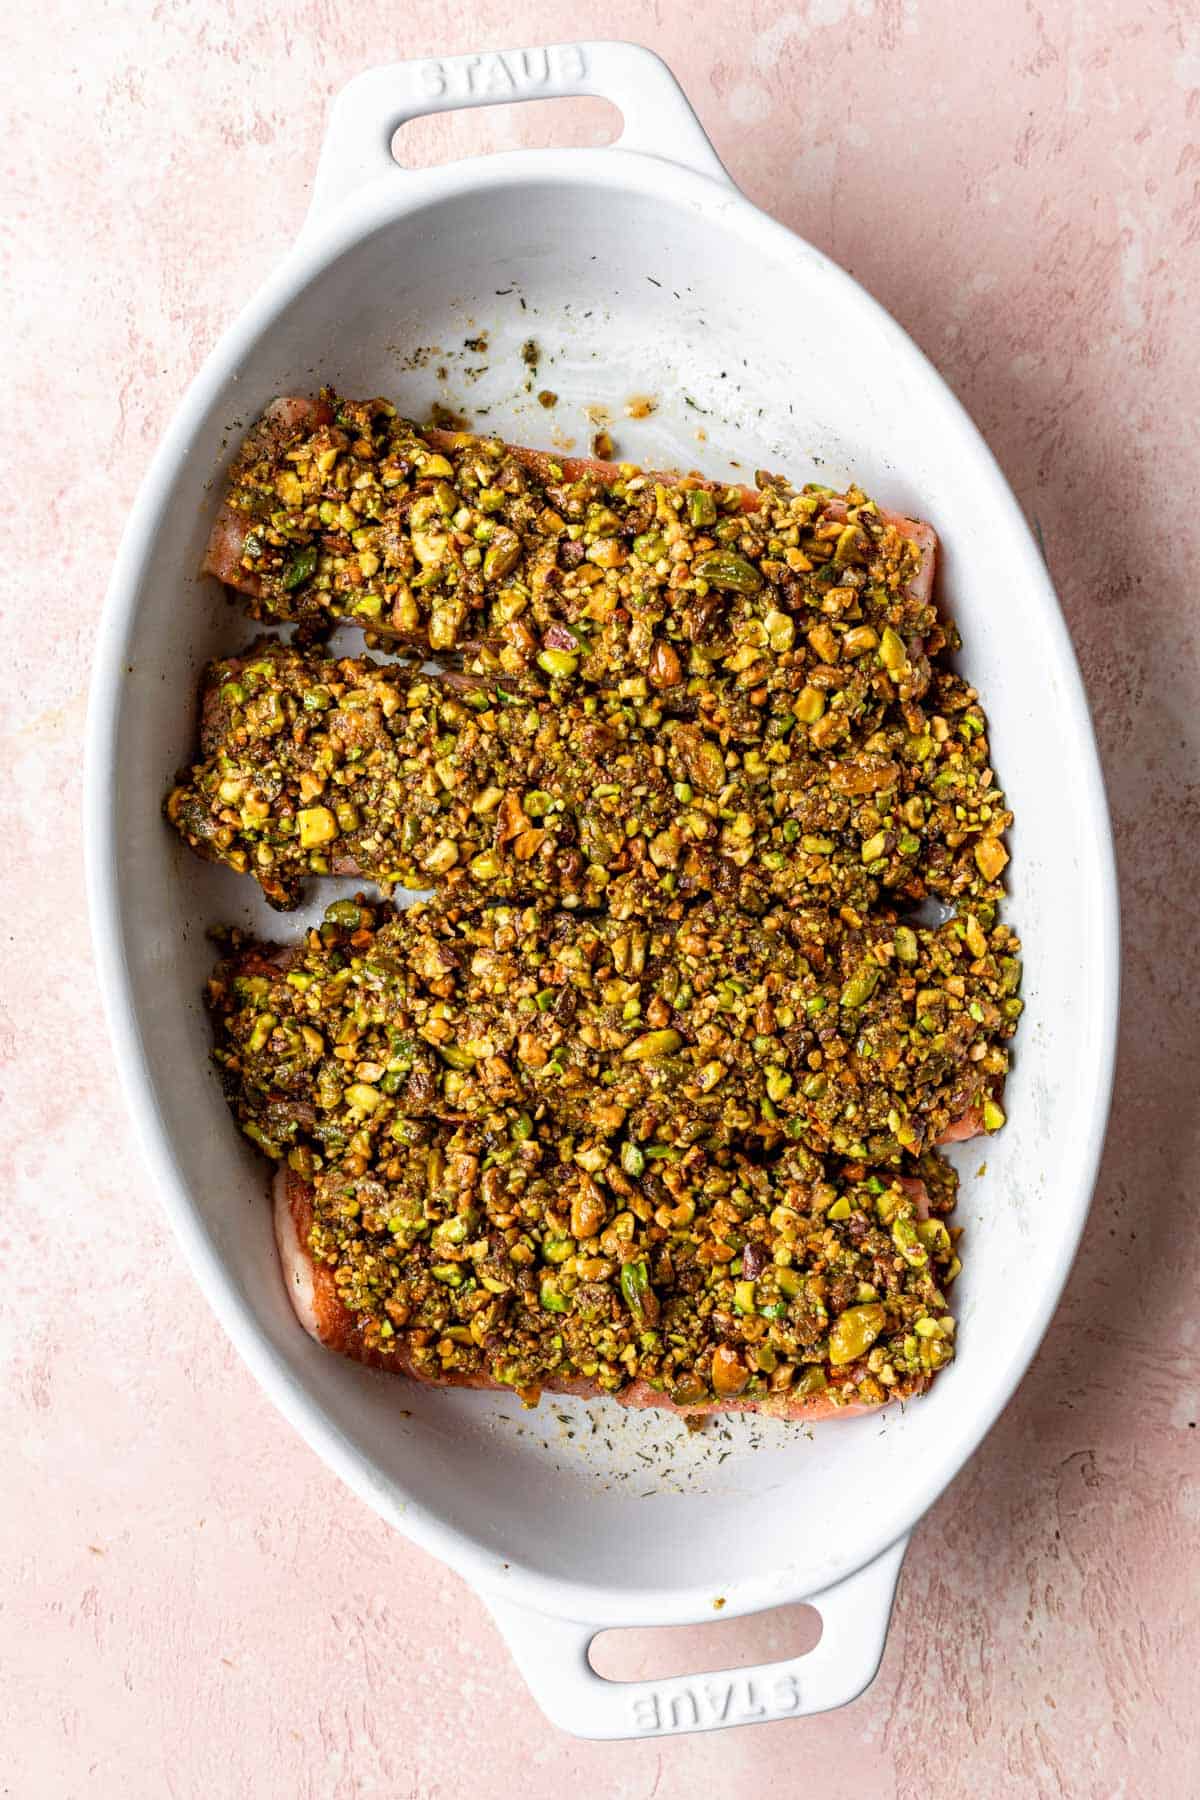 4 filets of salmon topped with crushed pistachios in a baking dish.